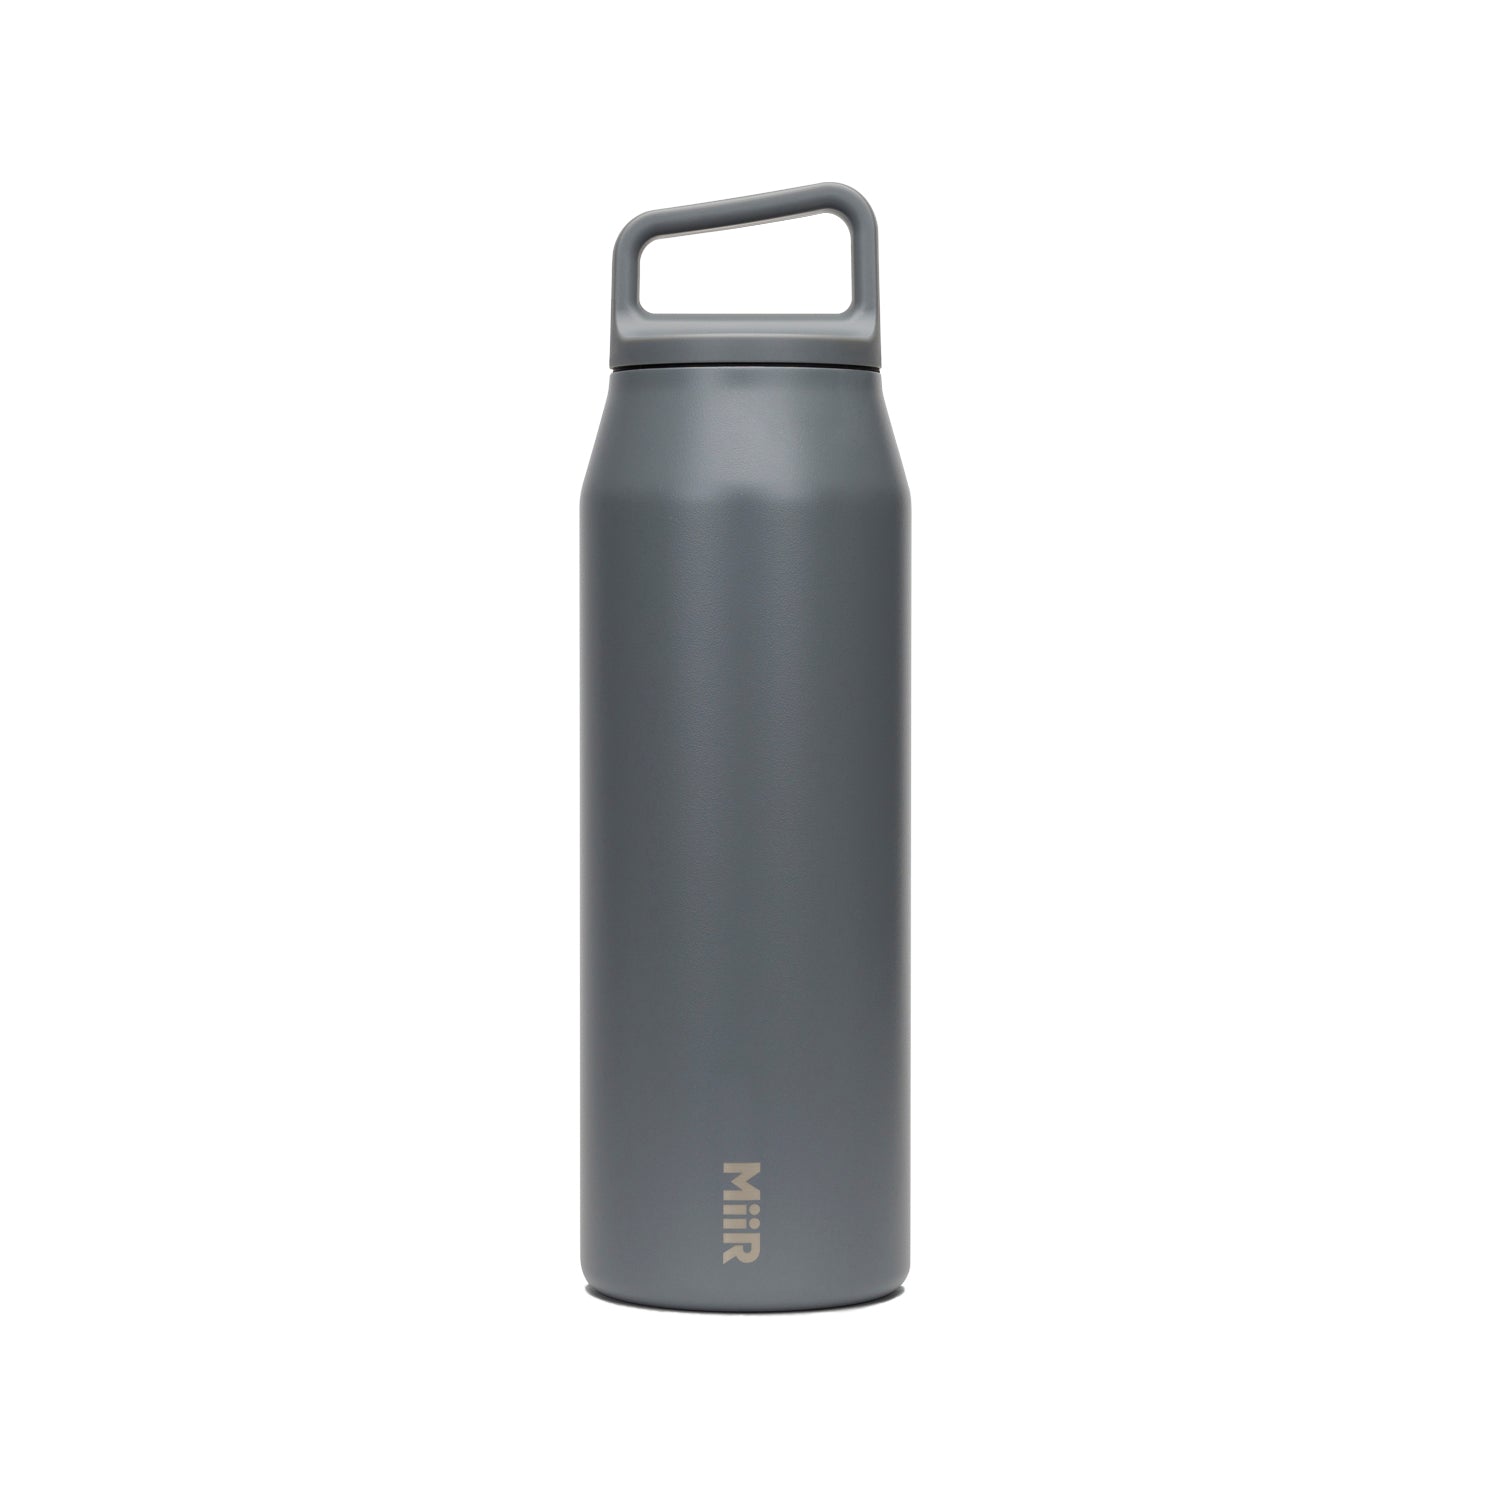 Live Wildly x MiiR 20 oz. Insulated Wide Mouth Water Bottle - Home